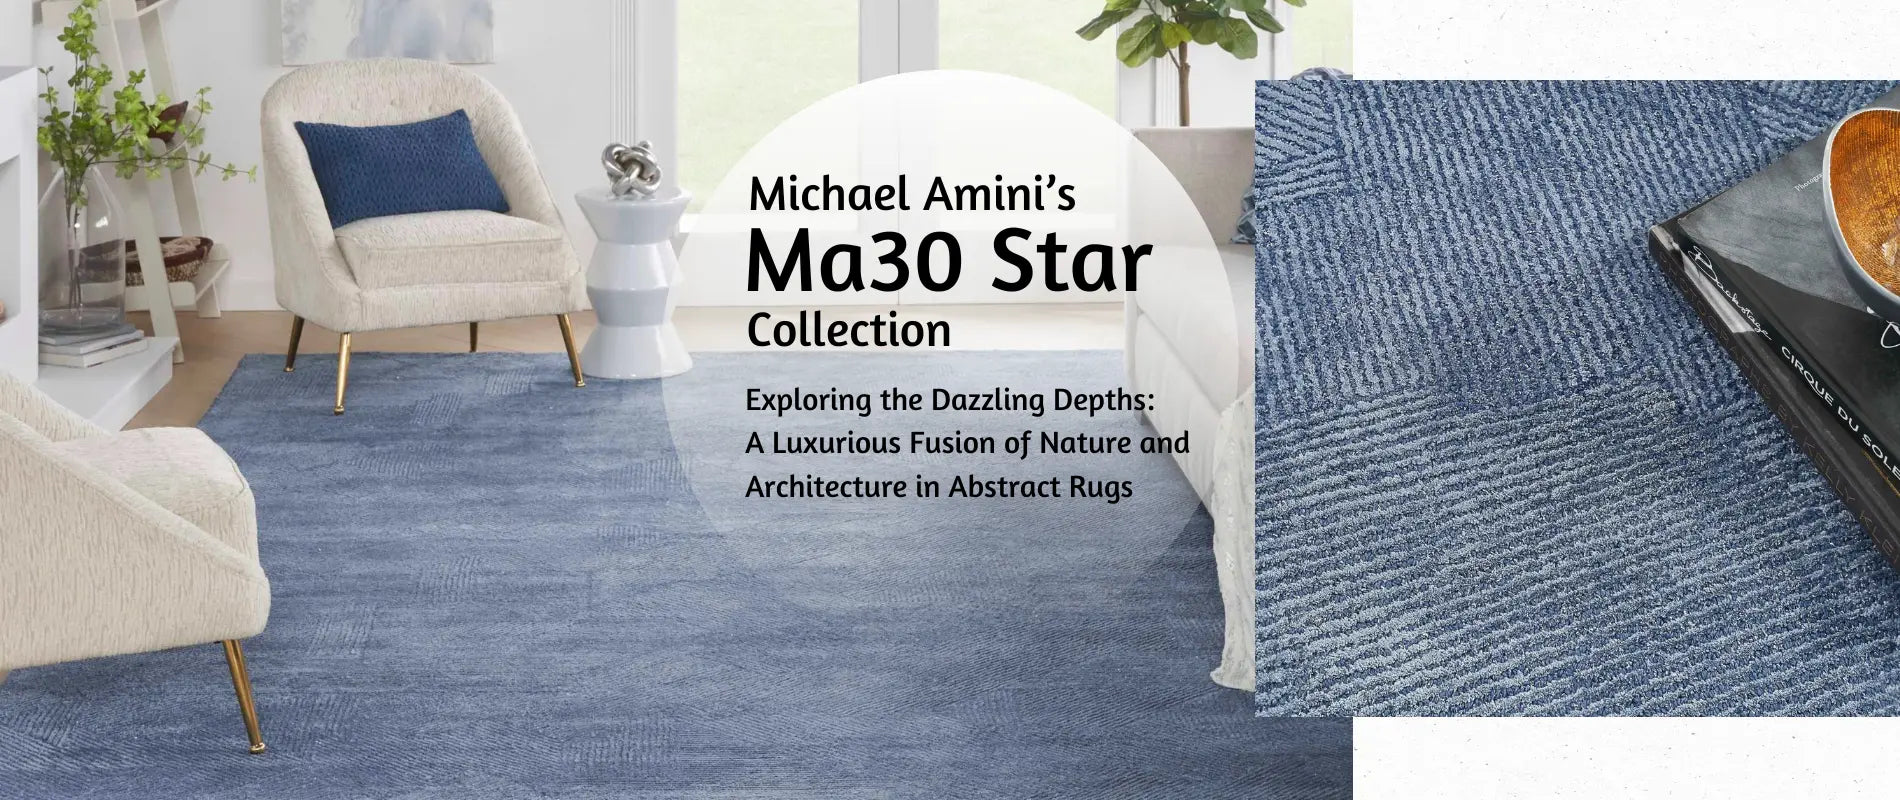 Hand-tufted Michael Amini Star Rug Collection by Nourison featuring abstract designs inspired by natural landscapes and architectural styles, with wool, lurex, and Luxcelle blend for a luxurious 3D effect